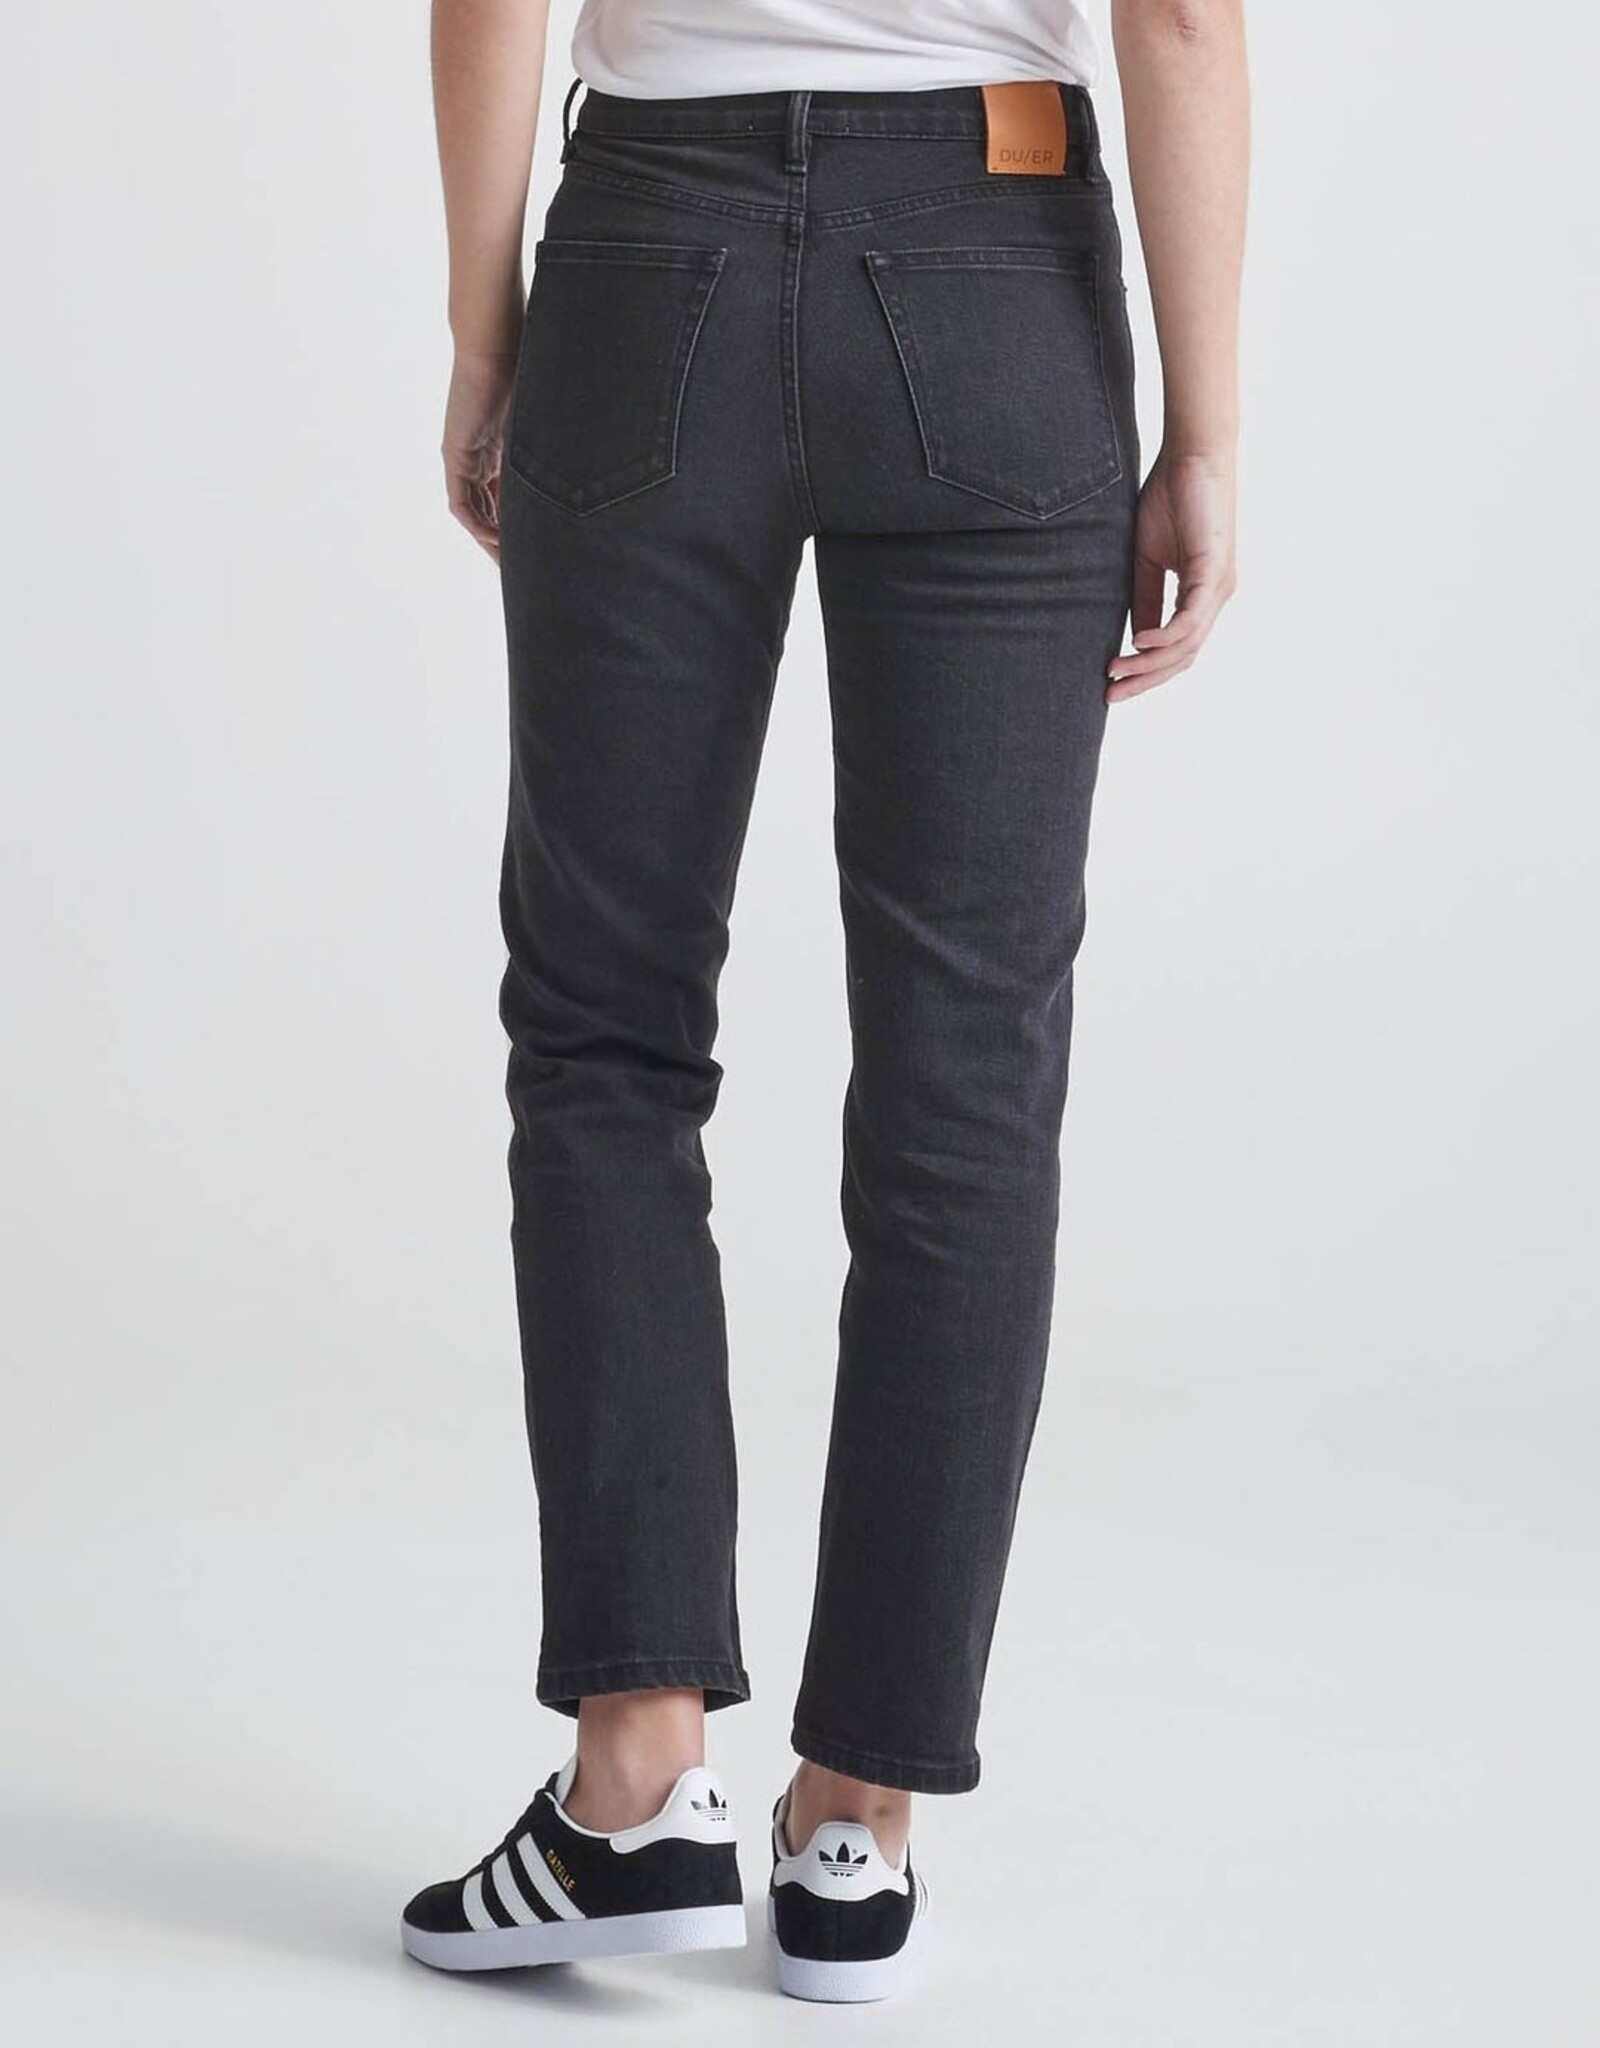 Duer Midweight Performance Denim High Rise Straight - Aged Black